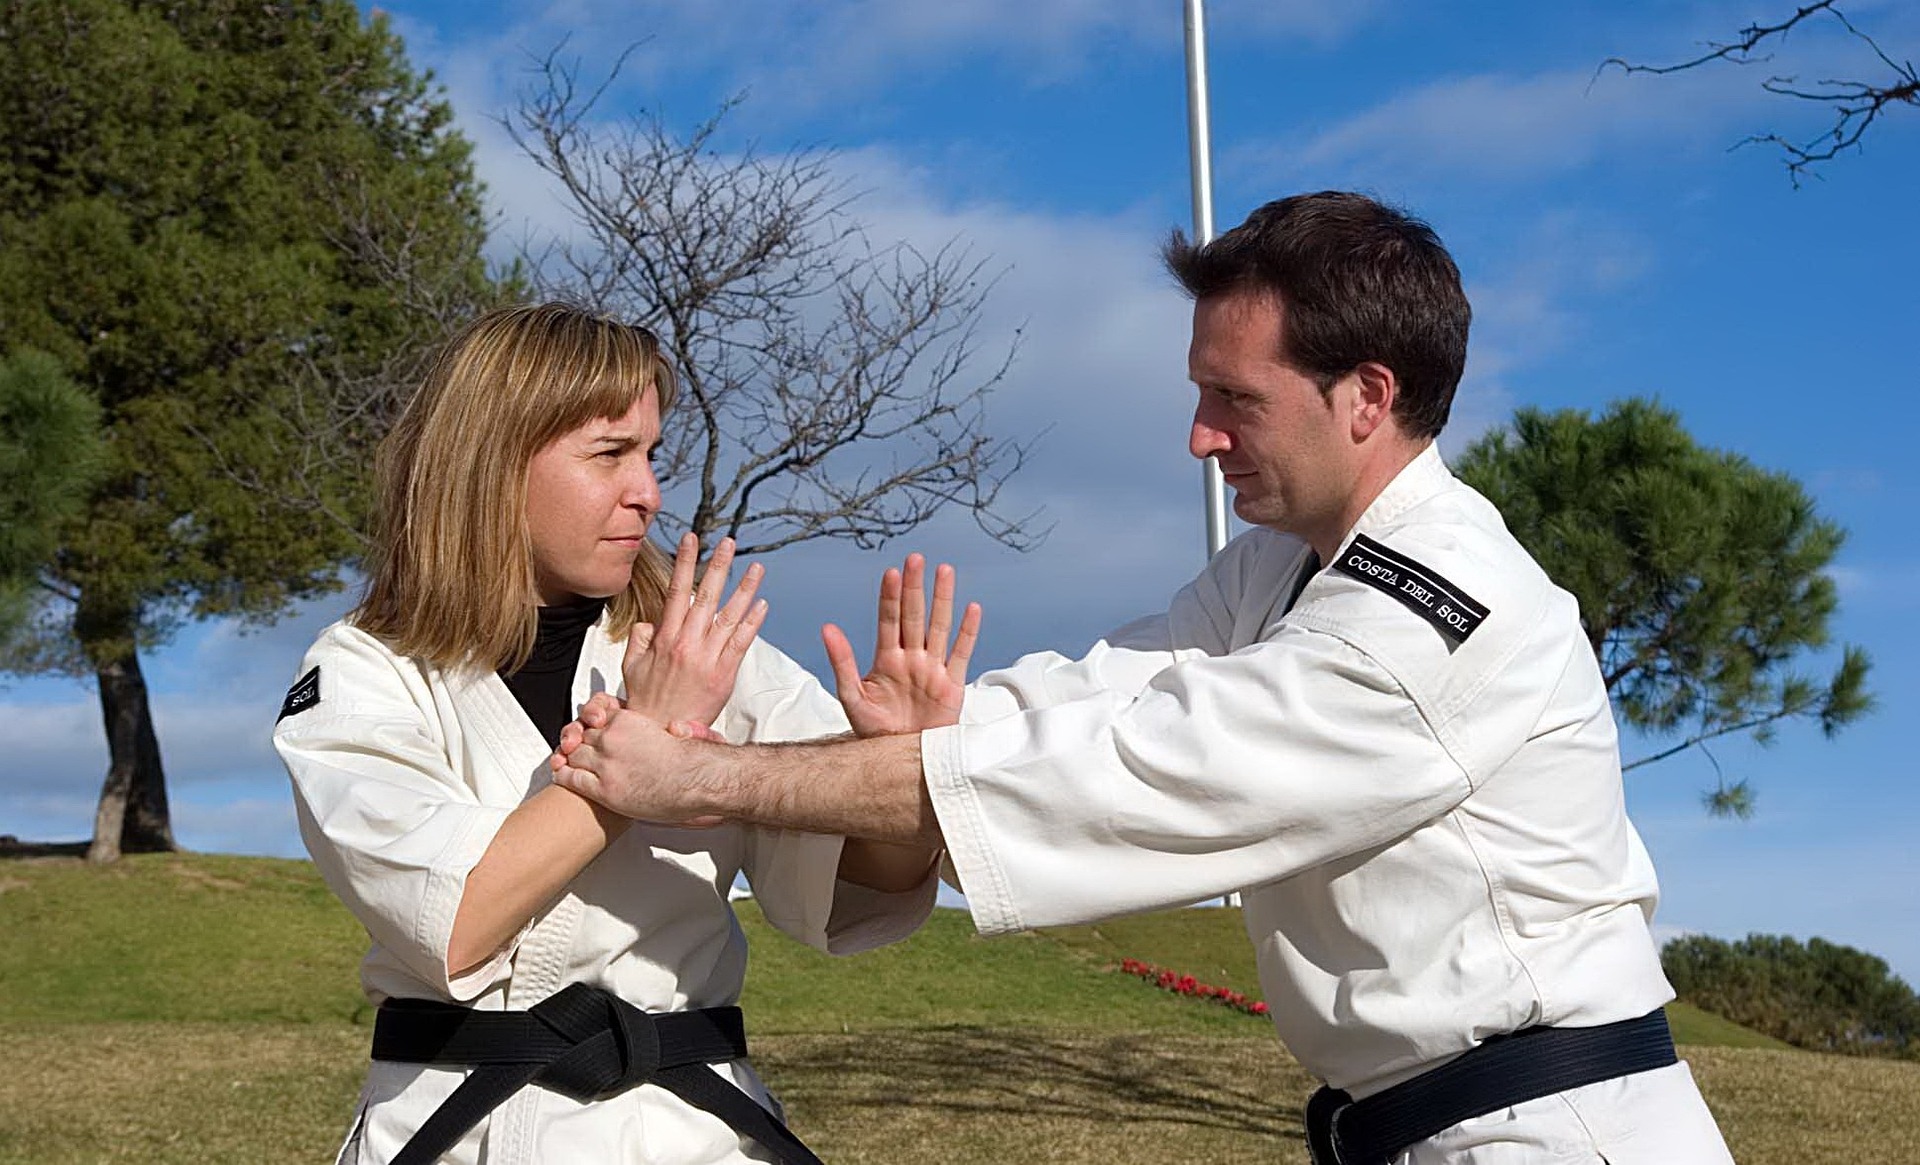 Man and woman sparring with karate gi on and black belts. 